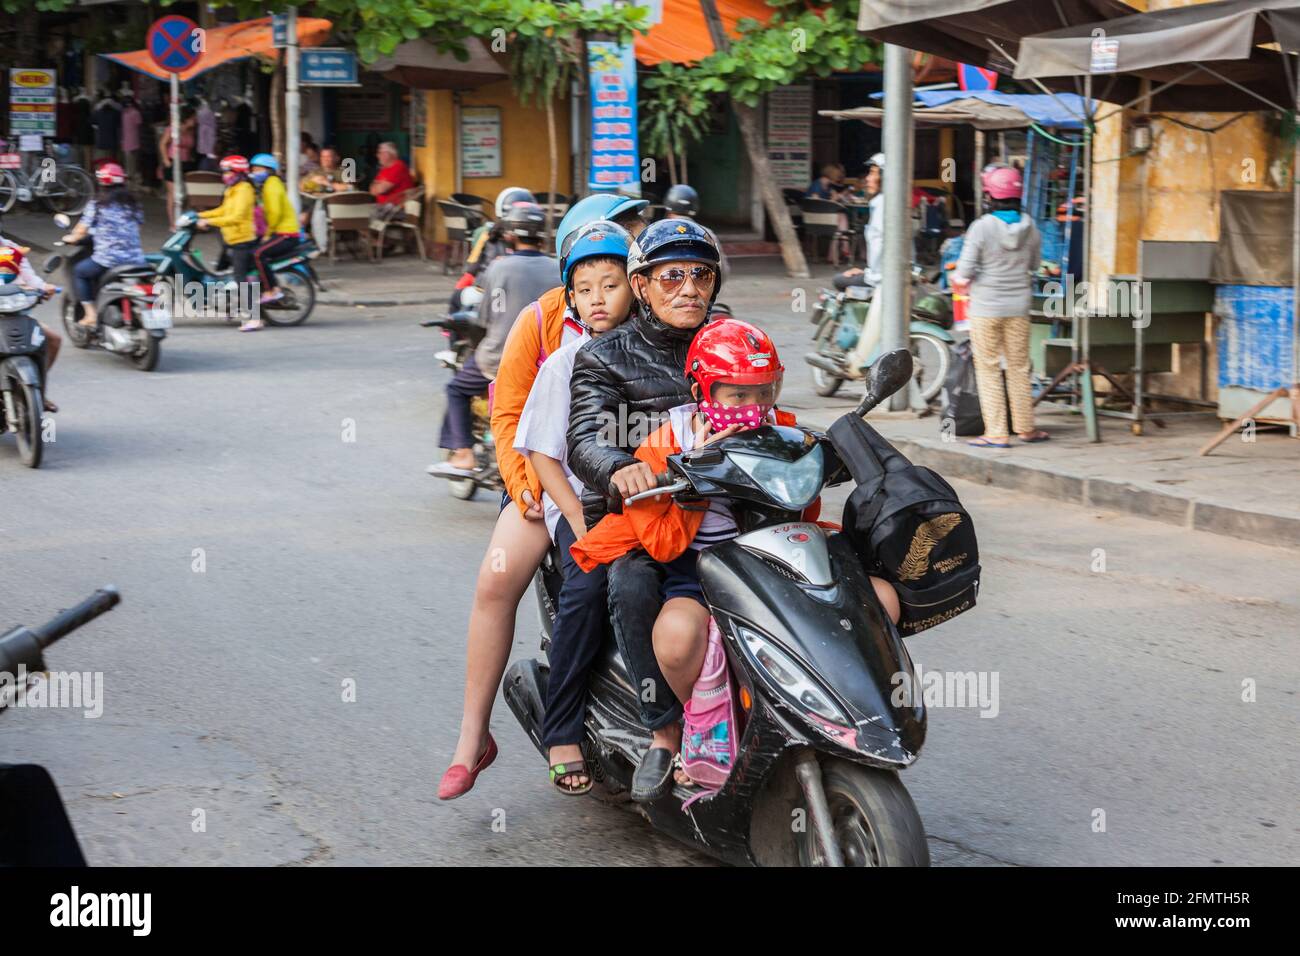 Vietnamese family of four crammed on scooter, Hoi An, Vietnam Stock Photo